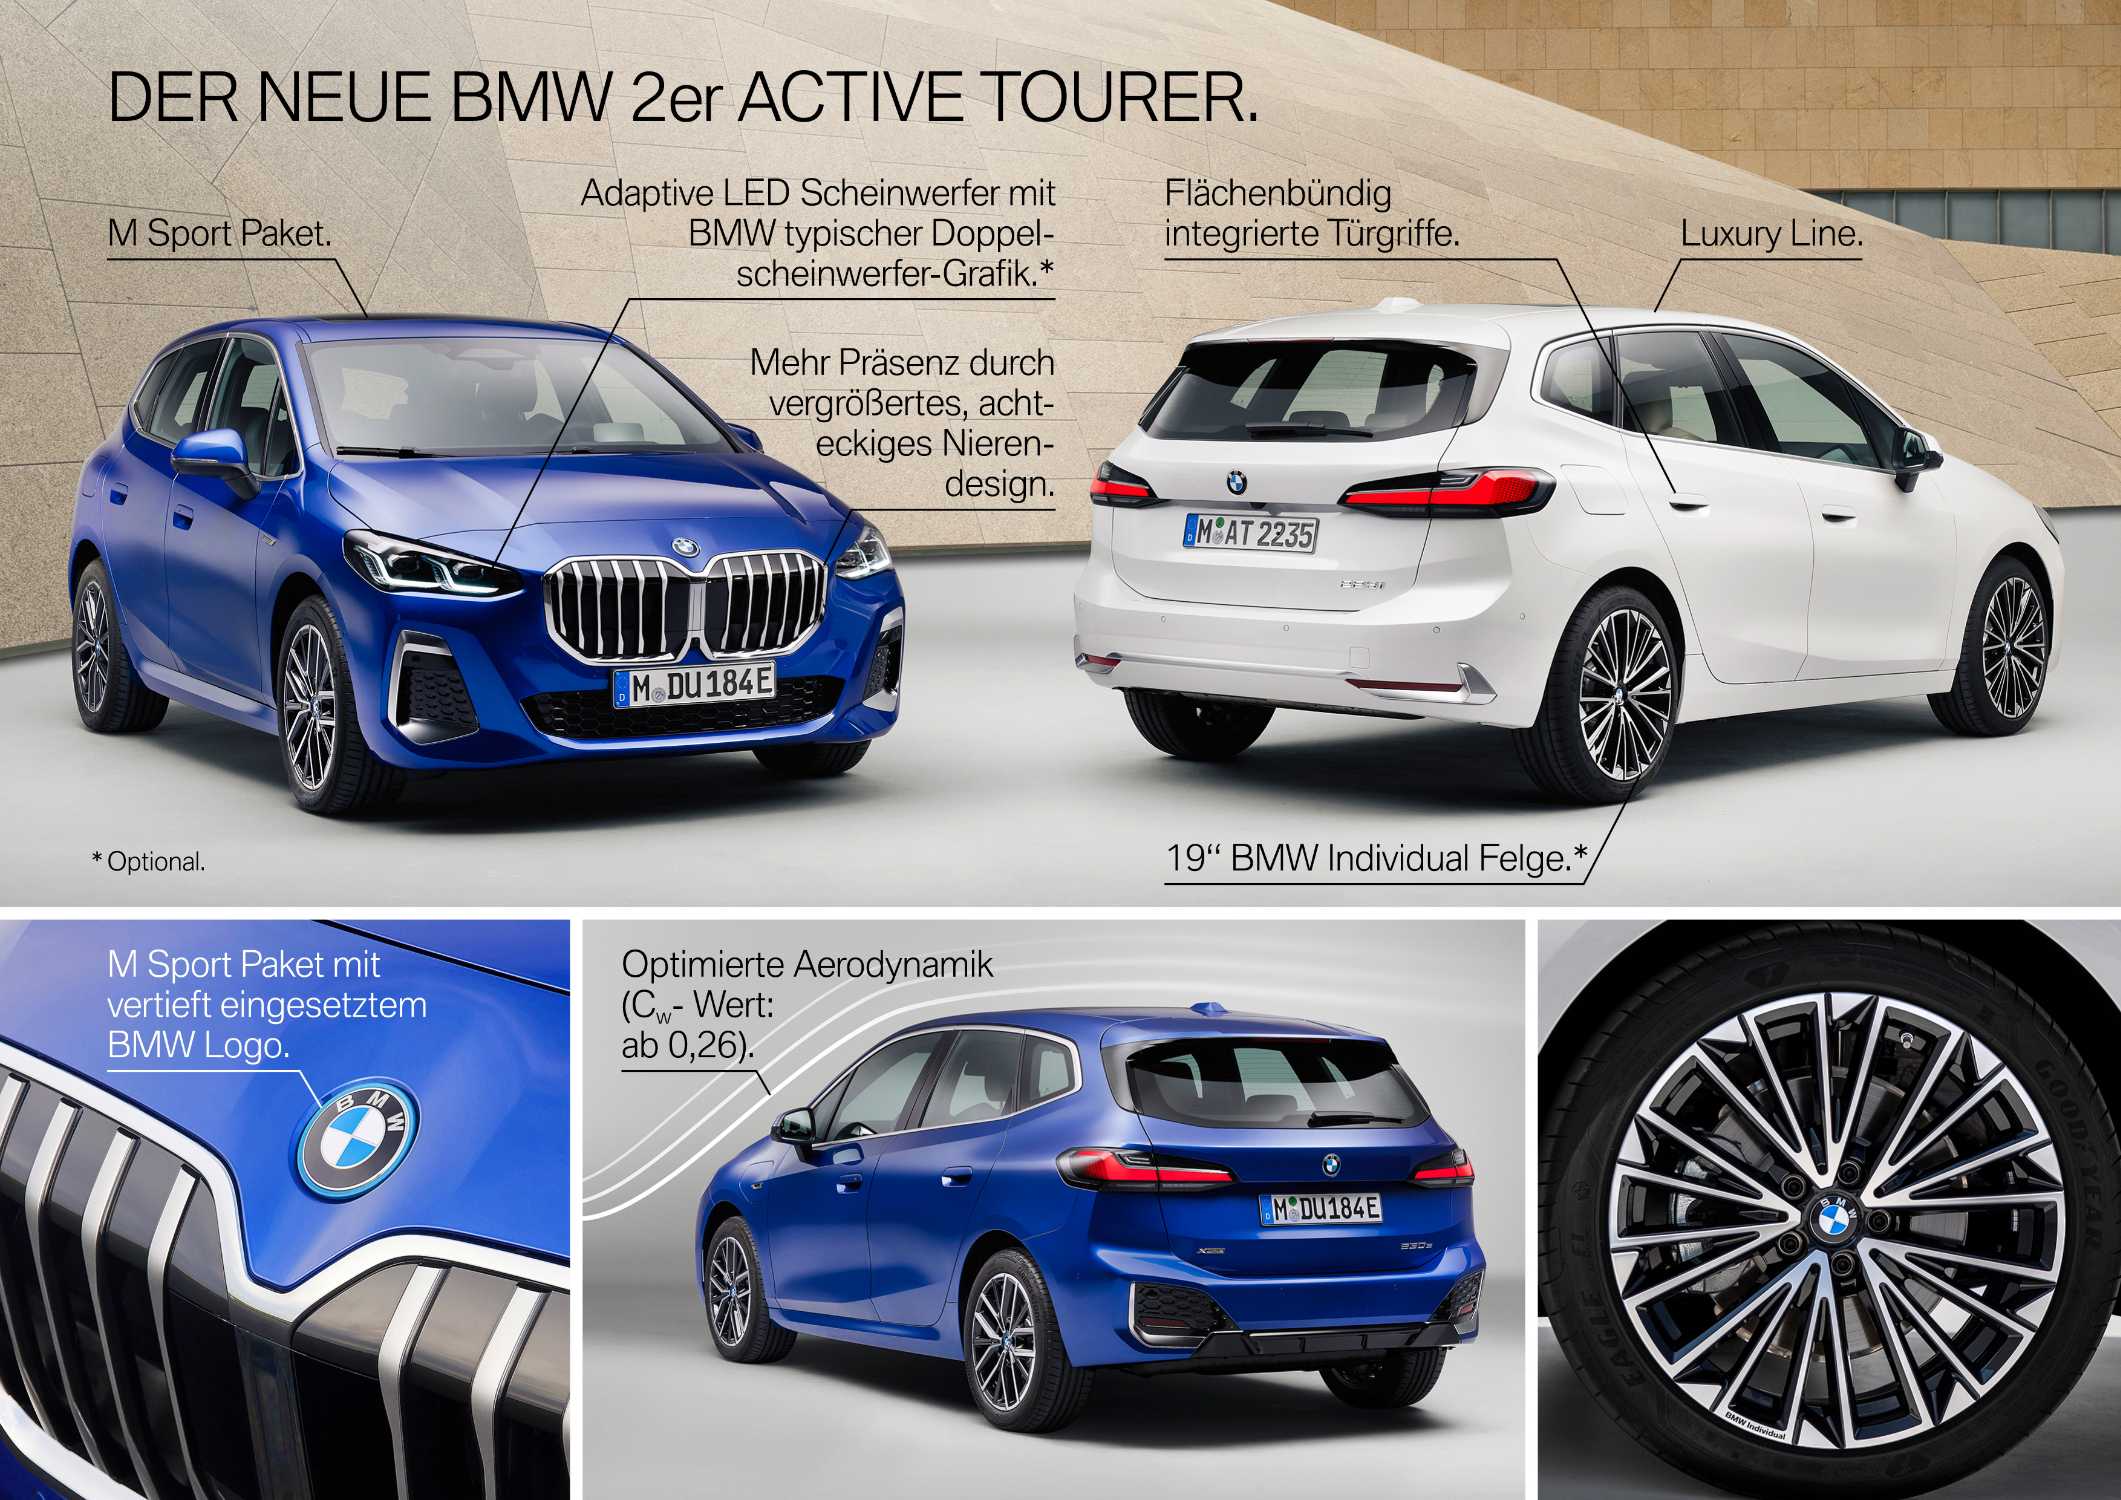 The all-new BMW 2 Series Active Tourer - Highlights (10/2021).